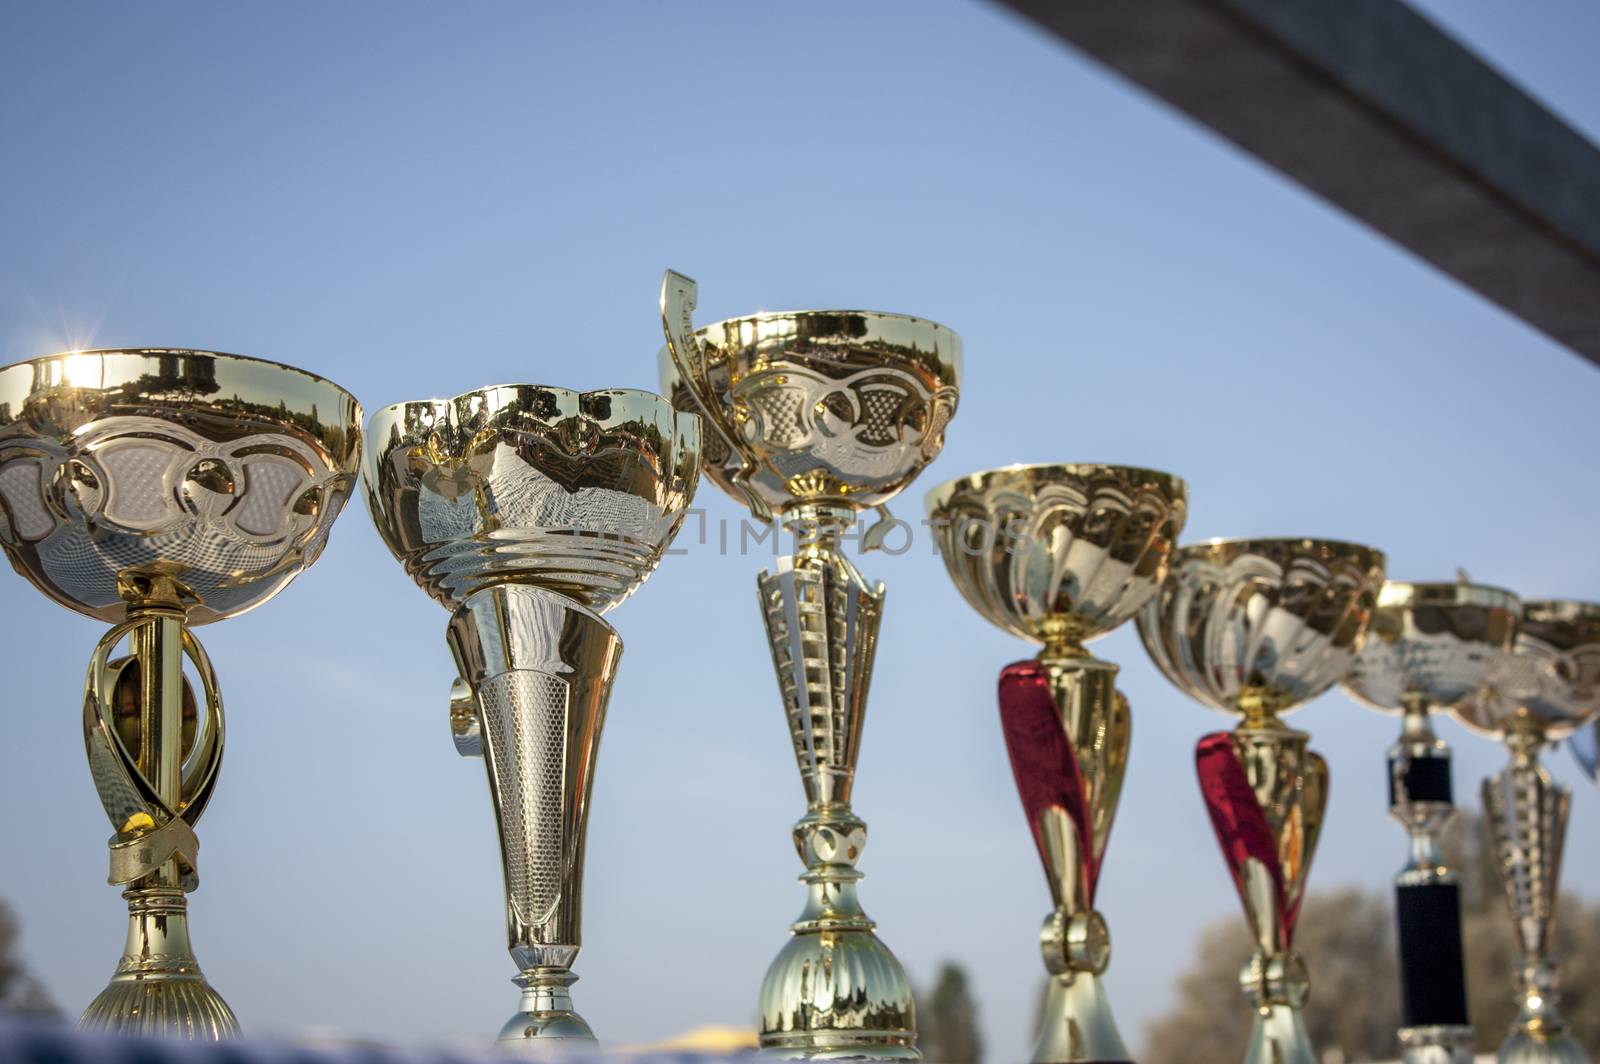 A set of cups or trophies ready to be delivered to the winners of the race